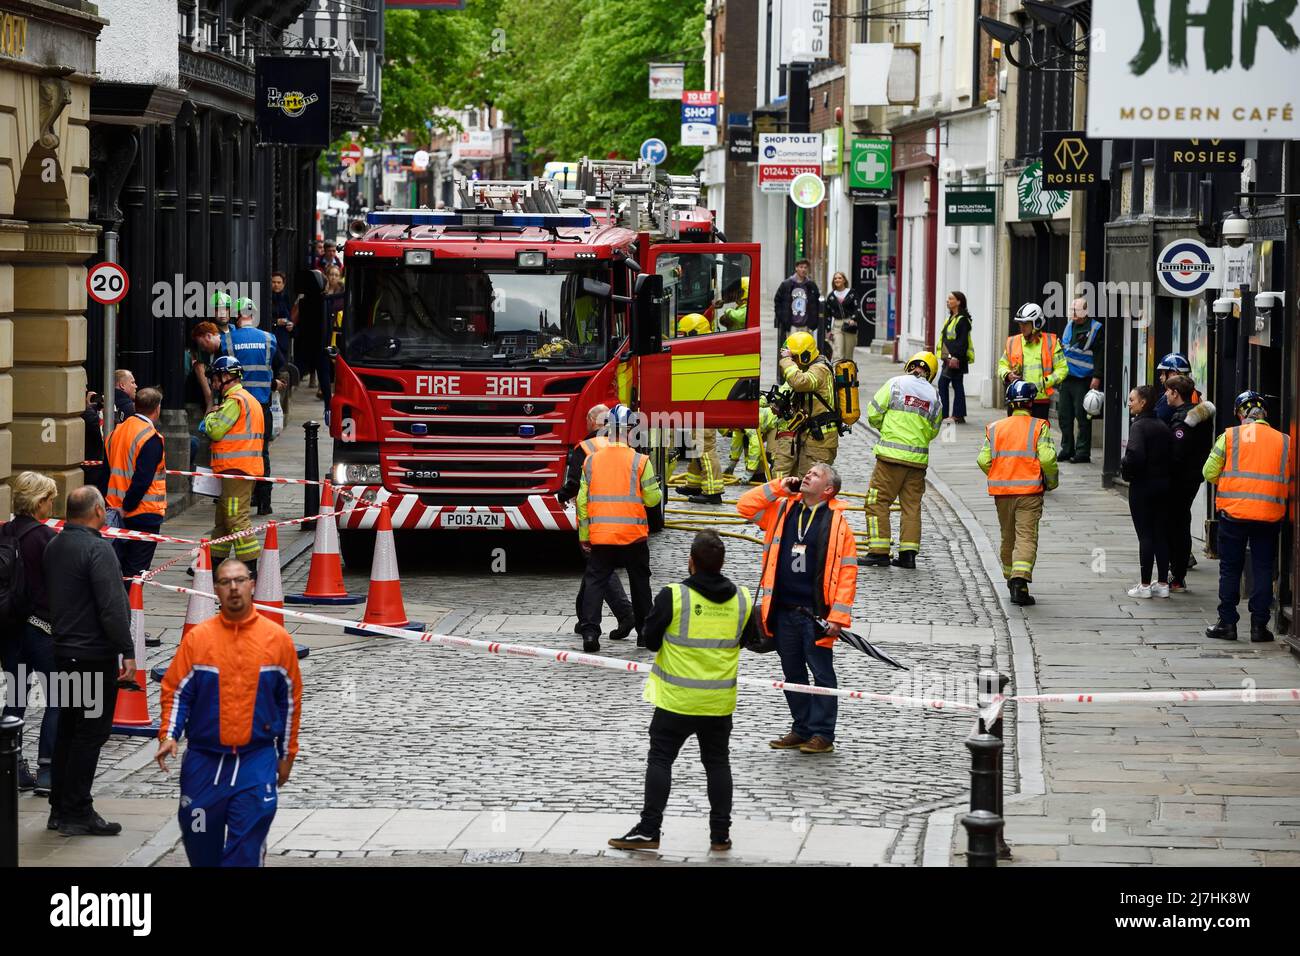 Deva Flame multi agency training exercise led by Cheshire Fire and Rescue Service taking place at Rosies nightclub Northgate Street Chester  UK Stock Photo